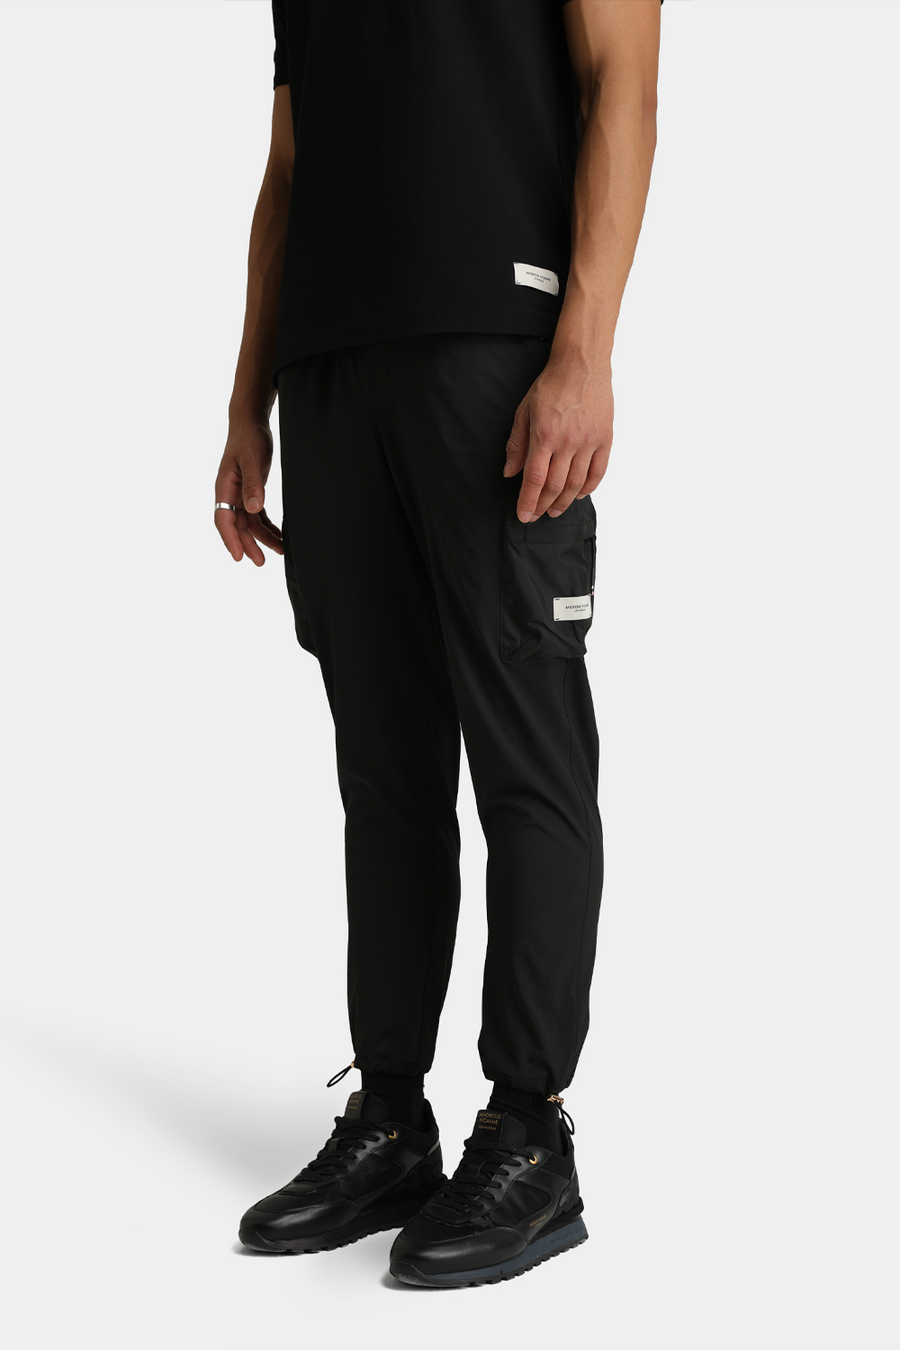 Buy the Android Homme AH Track Sweatpants in Black at Intro. Spend £50 for free UK delivery. Official stockists. We ship worldwide.